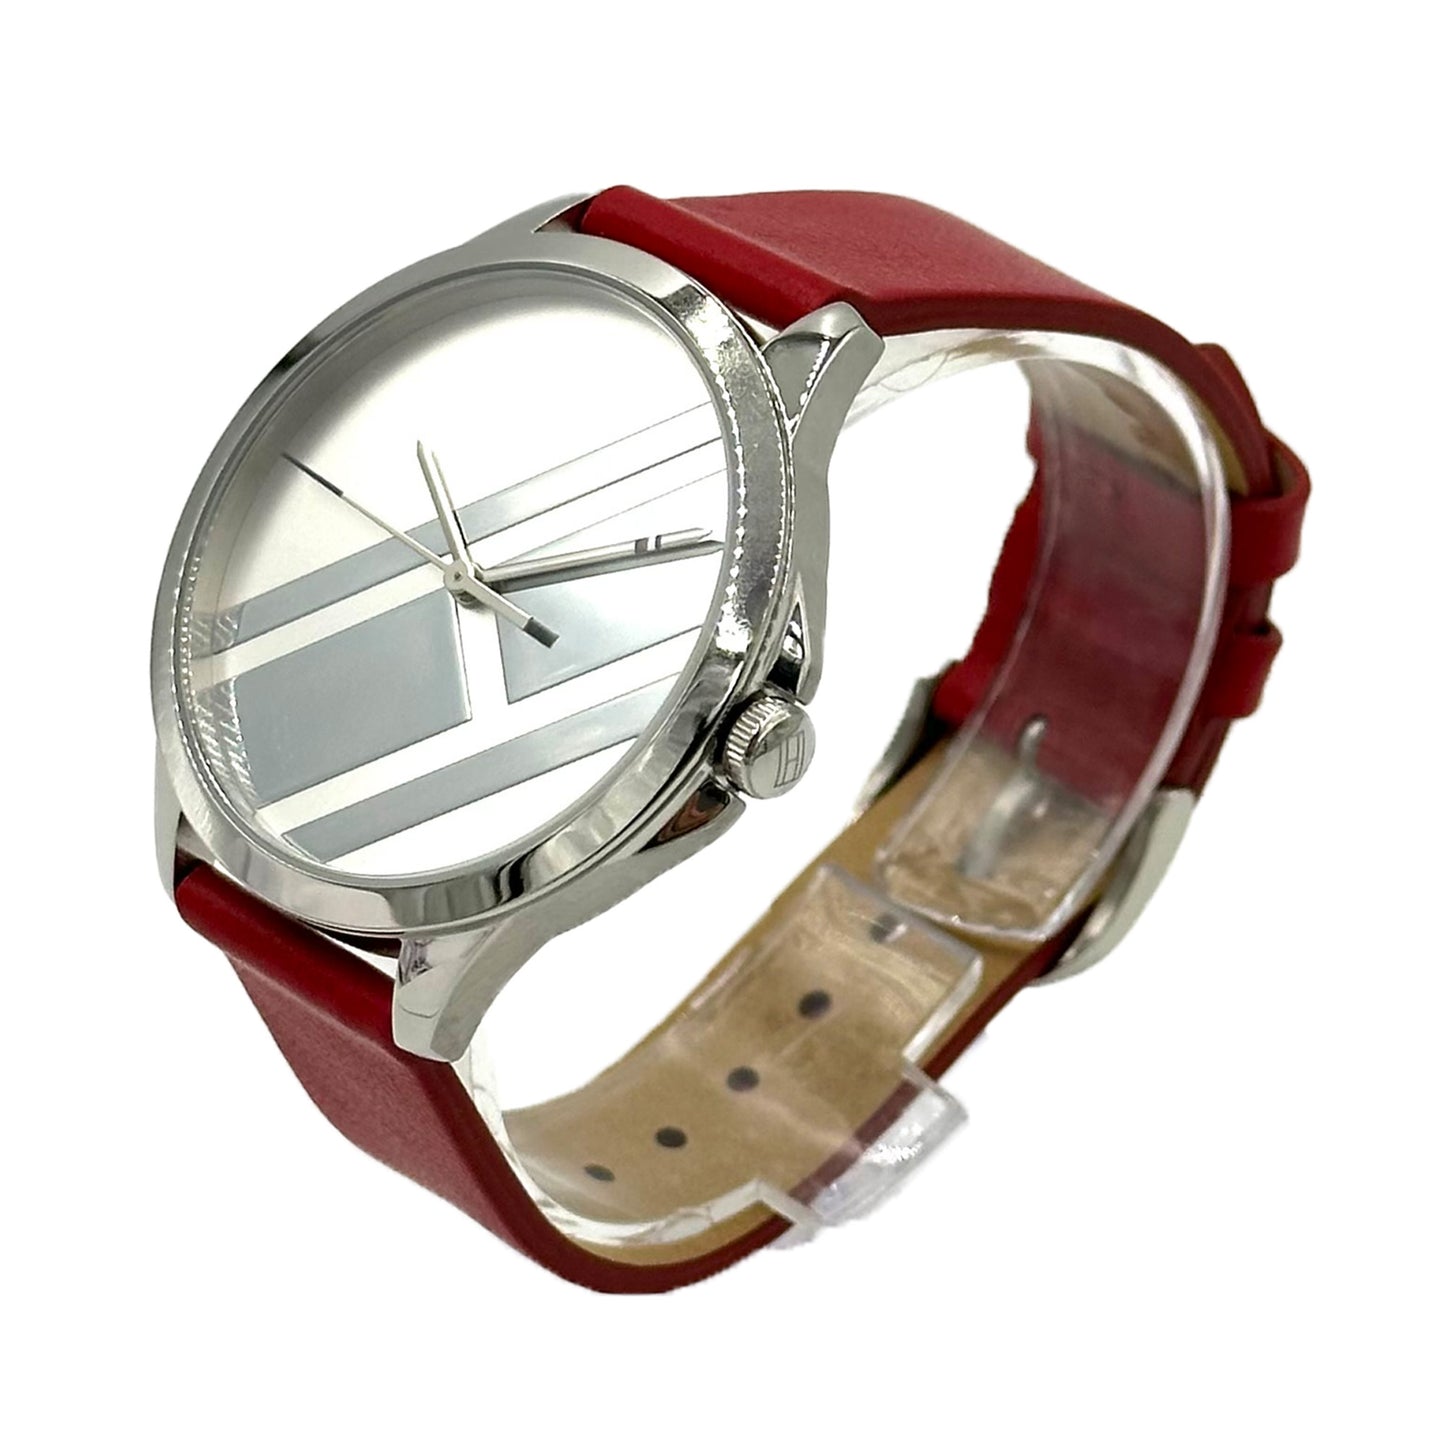 Tommy Hilfiger Women's Red 38mm Leather Strap Watch - 1782000 - 885997290913